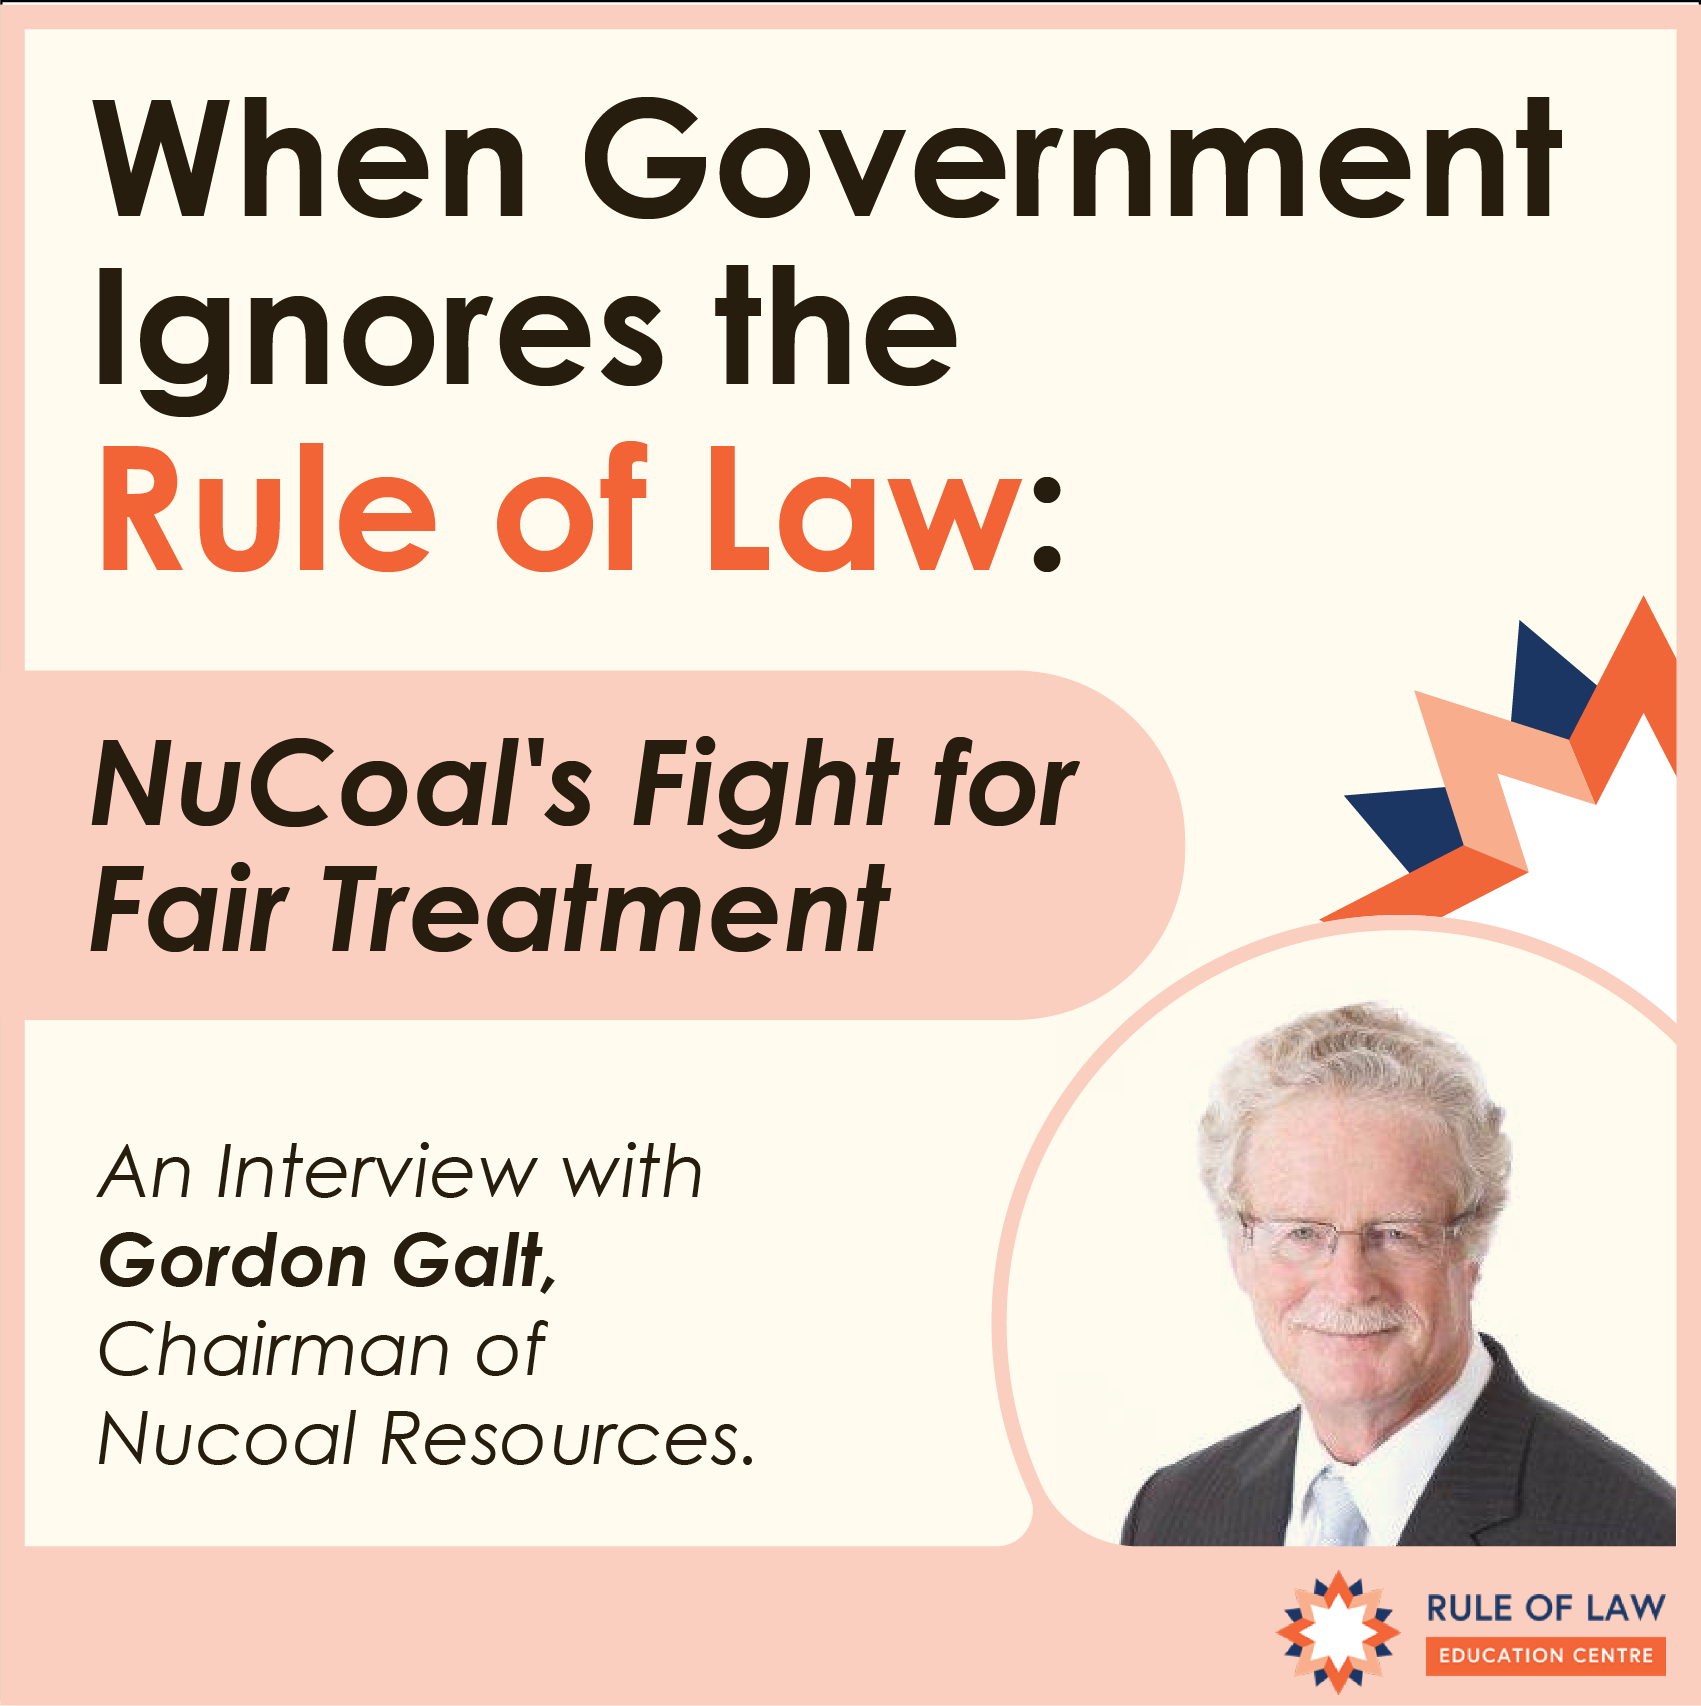 When Government ignores Rule of Law: Nucoal